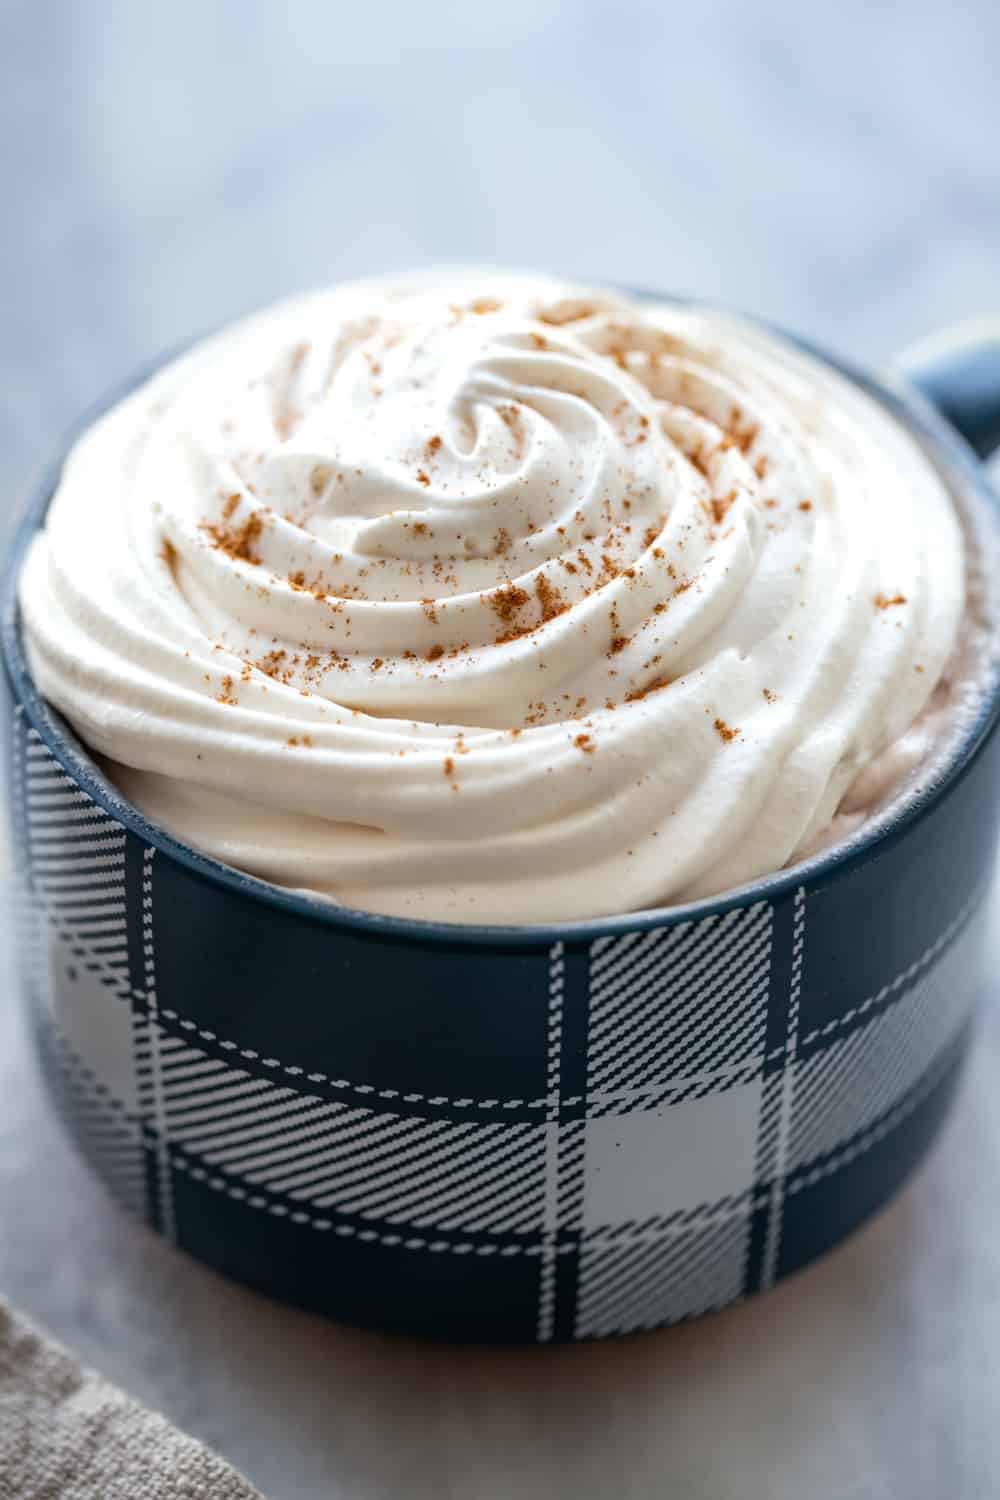 How To Make Homemade Whipped Cream My Baking Addiction, 55% OFF